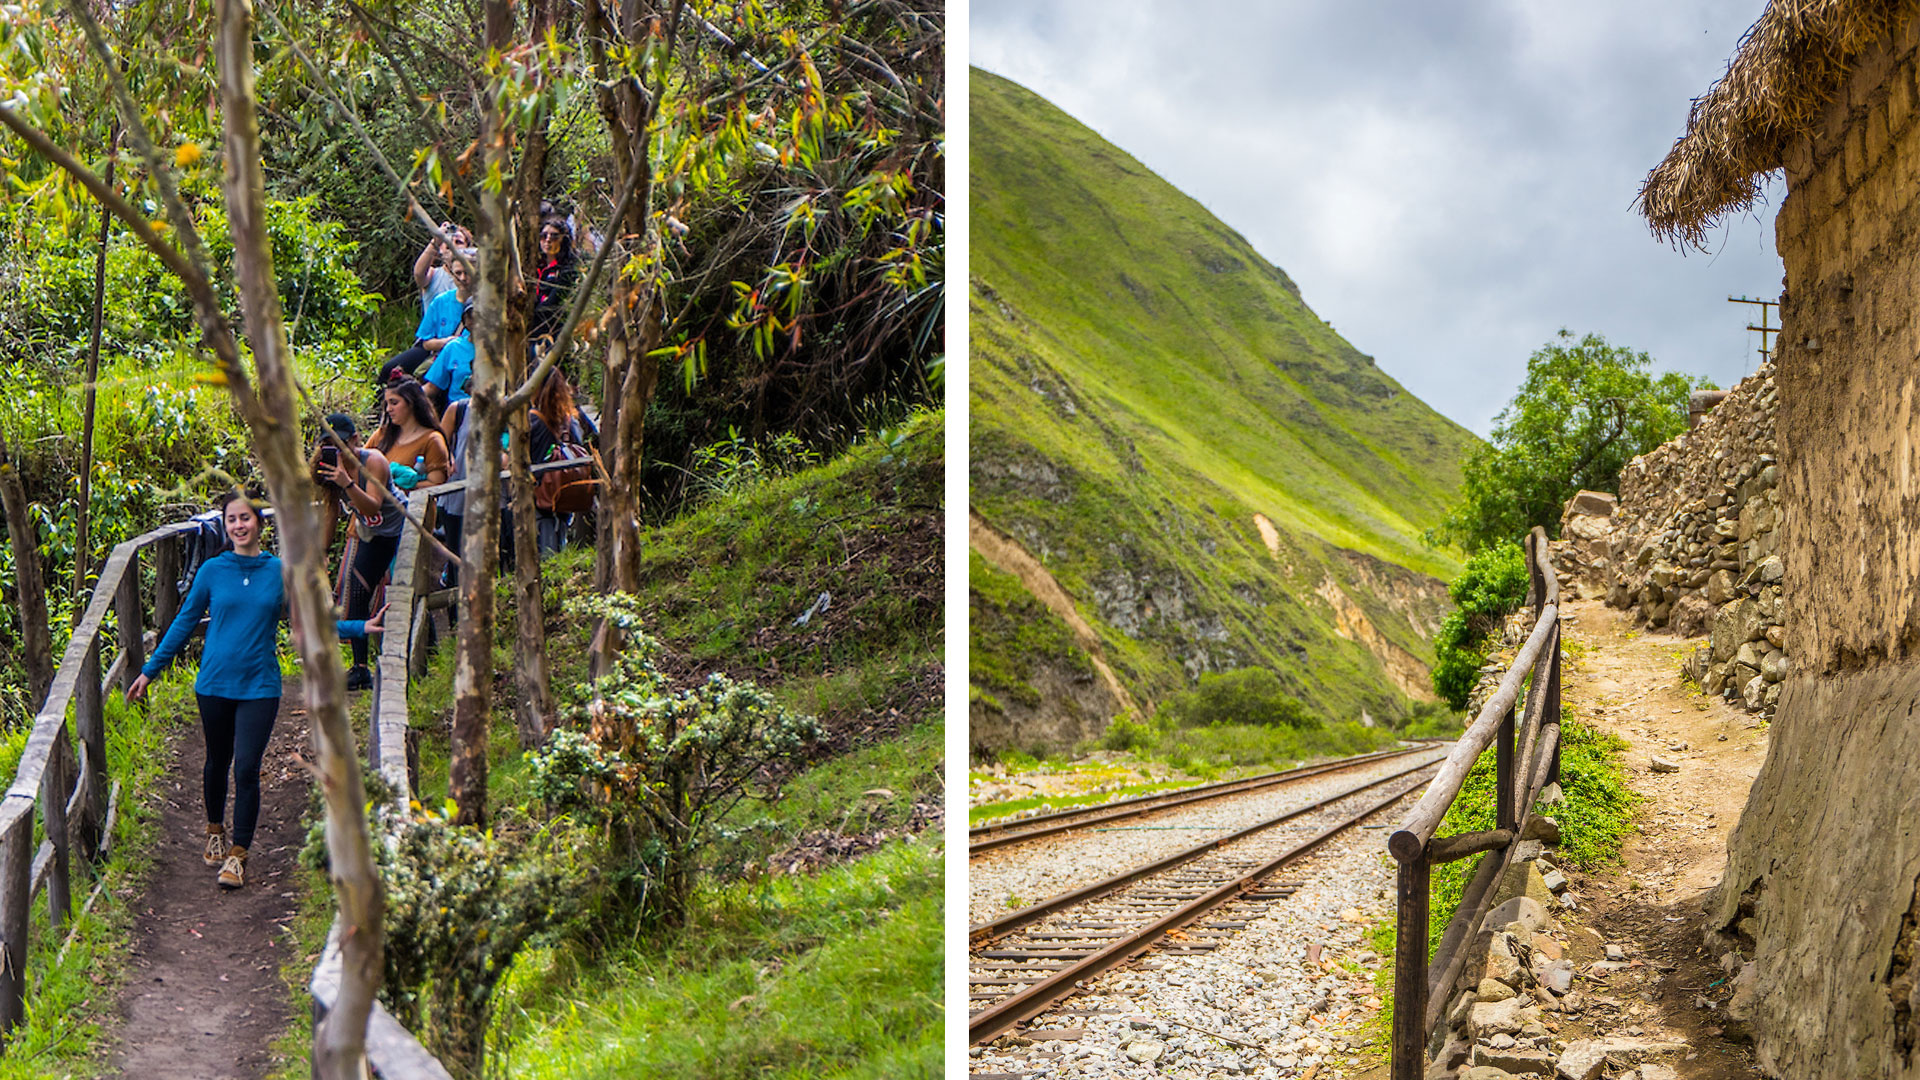 Students hiking at Cuicocha Lake in the Andes, Railroad track for the Devil’s Nose train